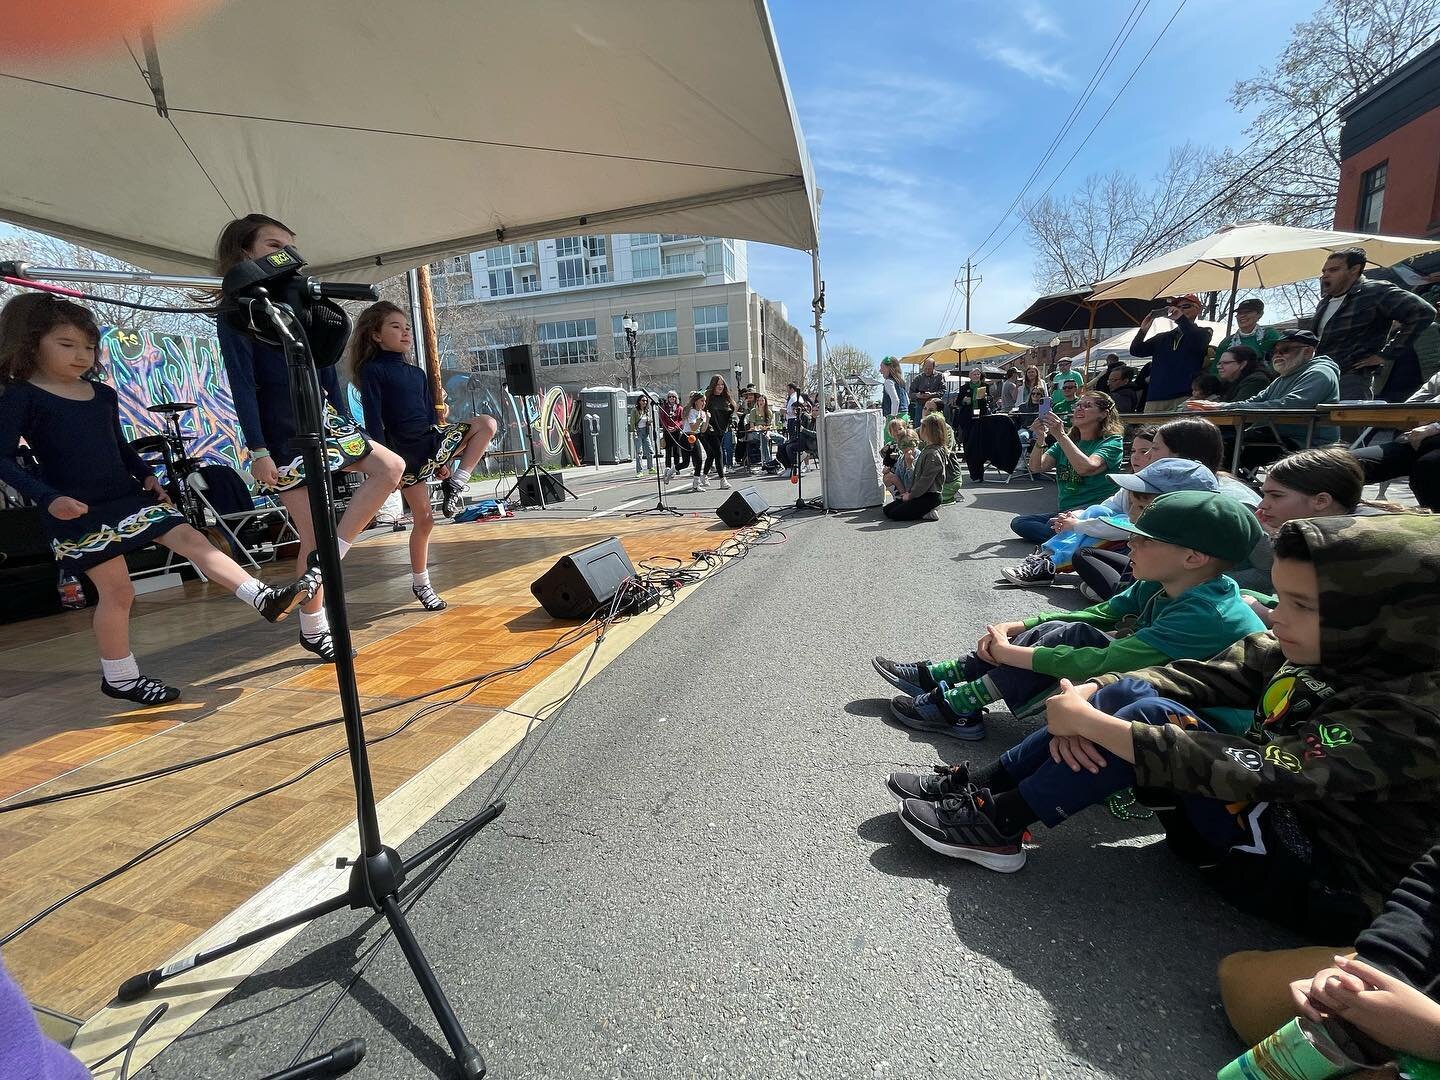 Thank you @slainteoakland A happy, well-fed crowd from all places and ages was spellbound by the @mcbrideirishdancers , enjoyed live music, delicious food, drink and festivities all day on 2nd street yesterday. And thank you for making the district s